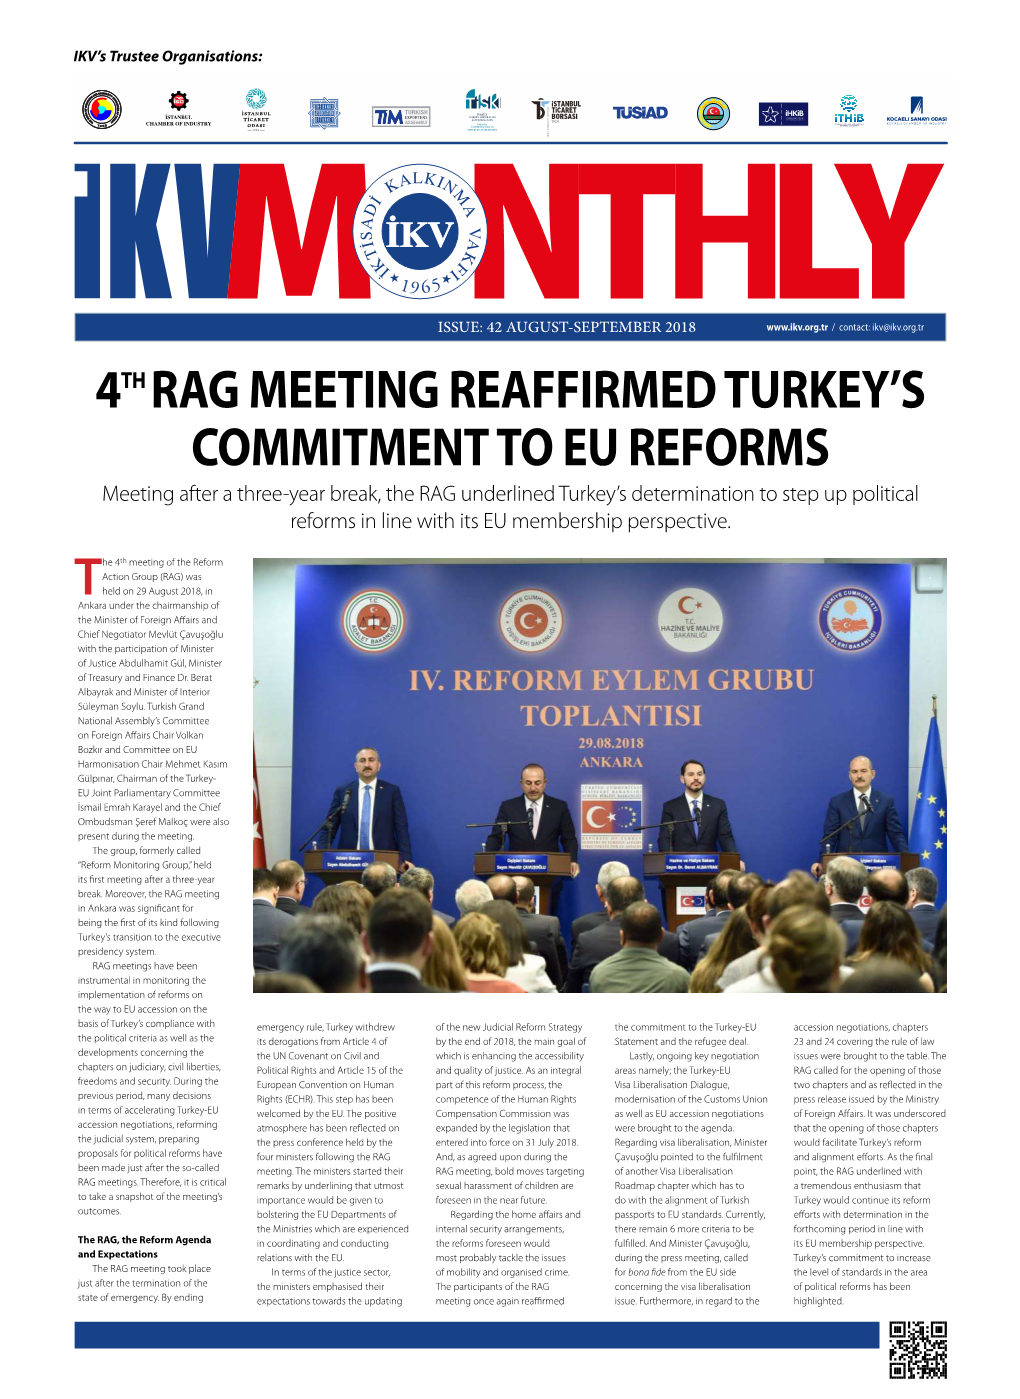 4Th Rag Meeting Reaffirmed Turkey's Commitment to Eu Reforms